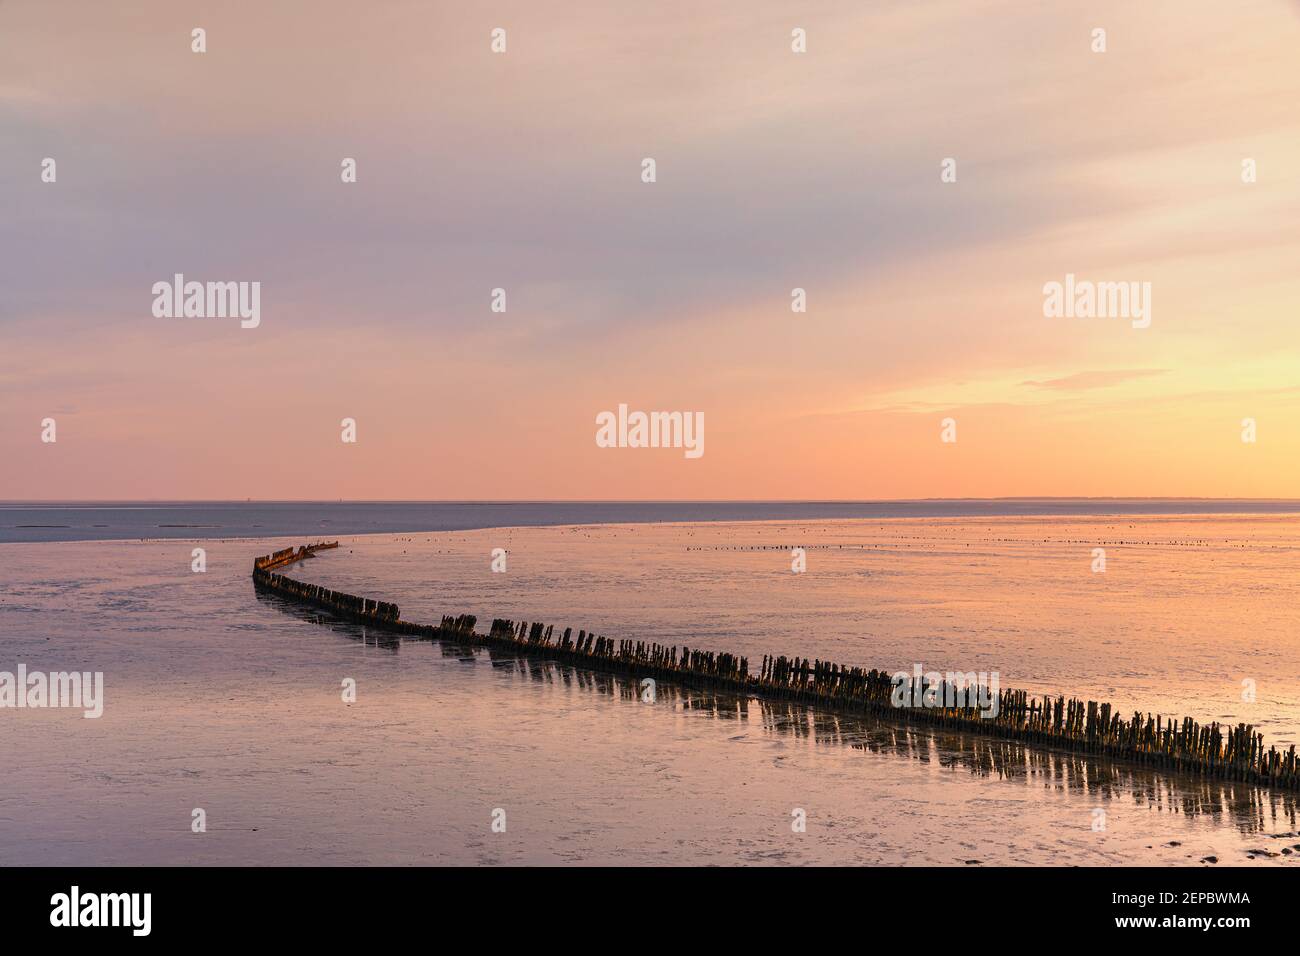 Sunrise over the Waddensea near the village of Wierum in the province of Friesland. Stock Photo